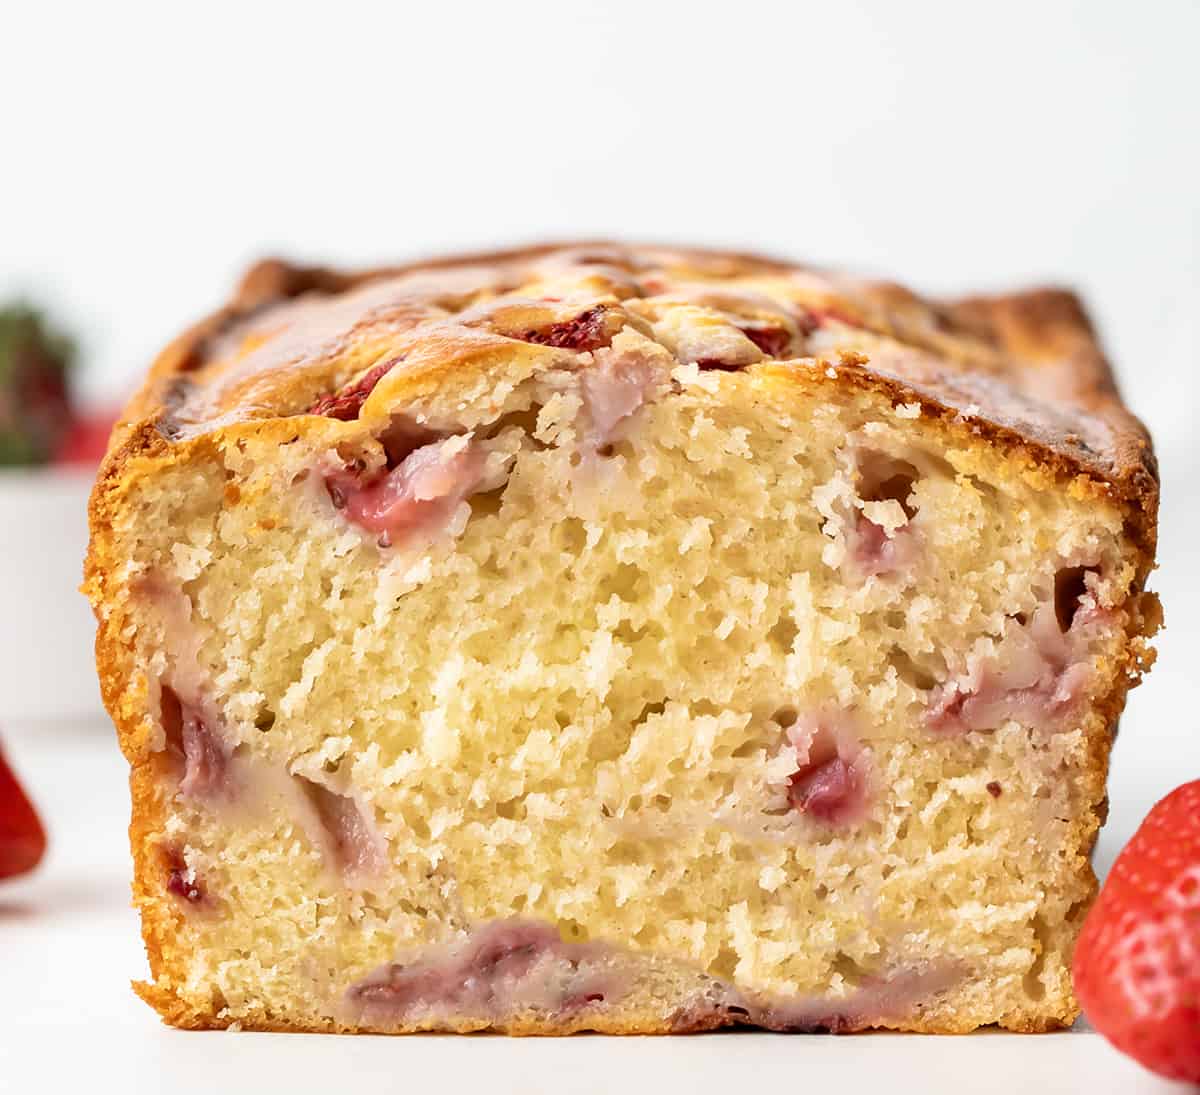 Cut into loaf of Strawberry Bread showing inside texture.